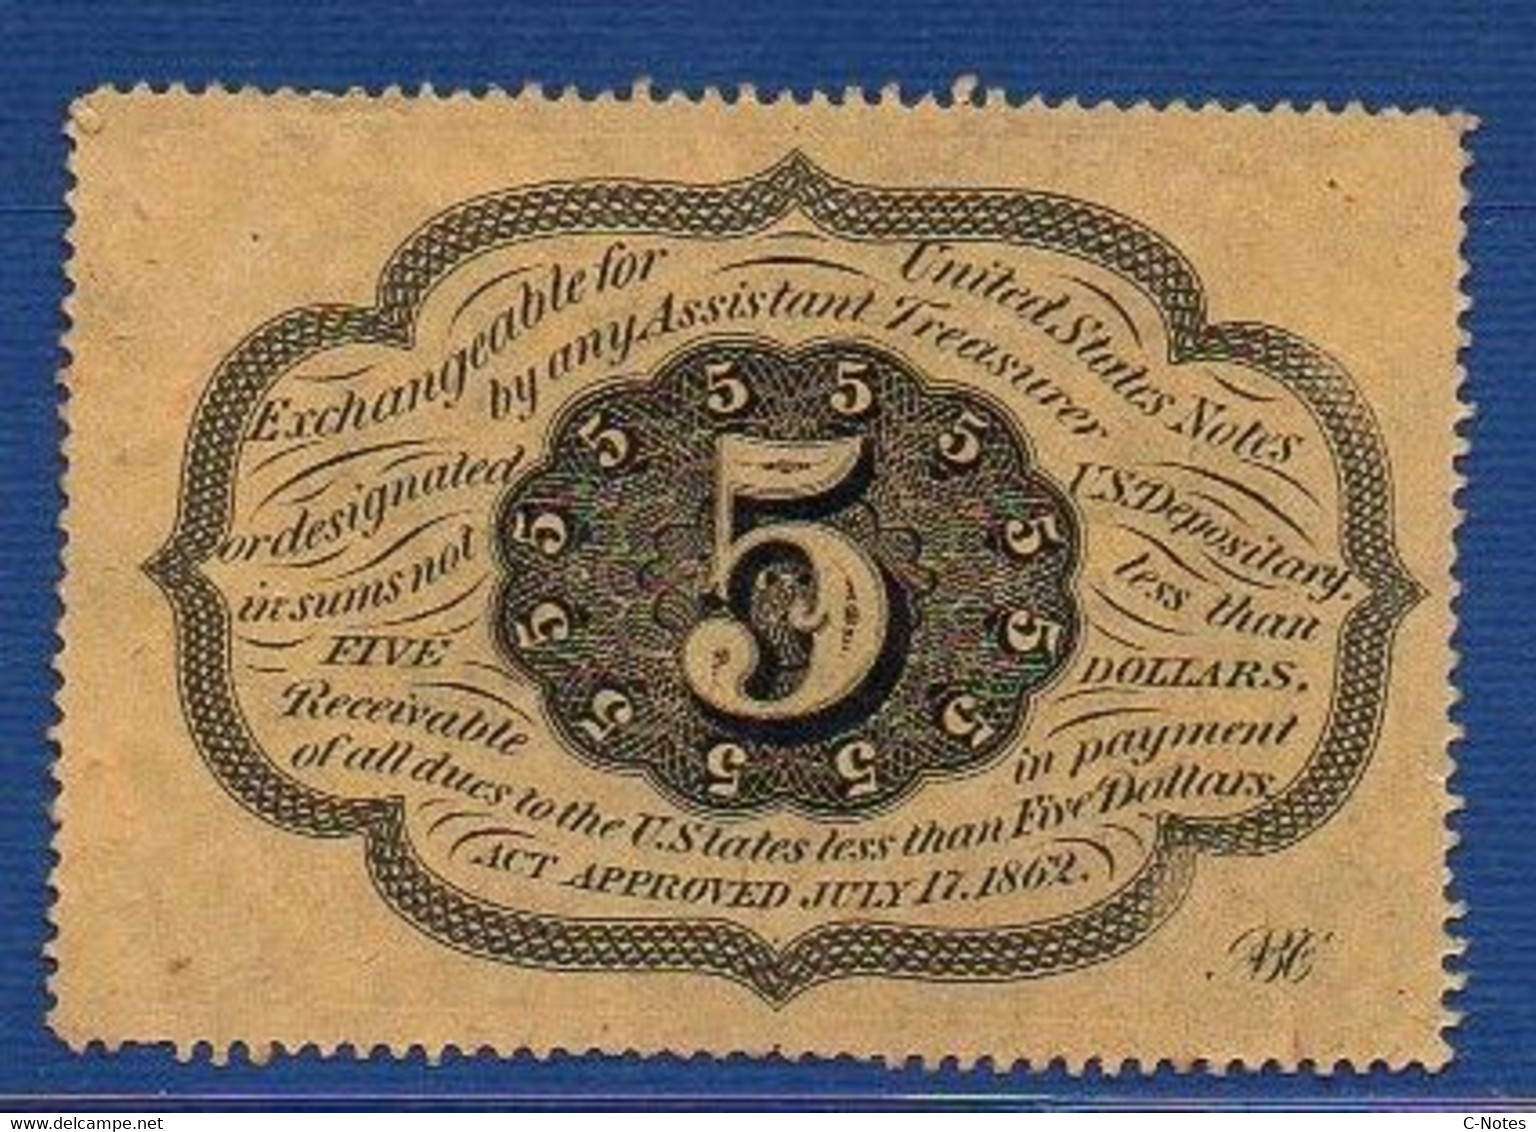 UNITED STATES OF AMERICA - P. 97a – 5 Cents 1862 AUNC, No Serial Number - 1862 : 1° Emission